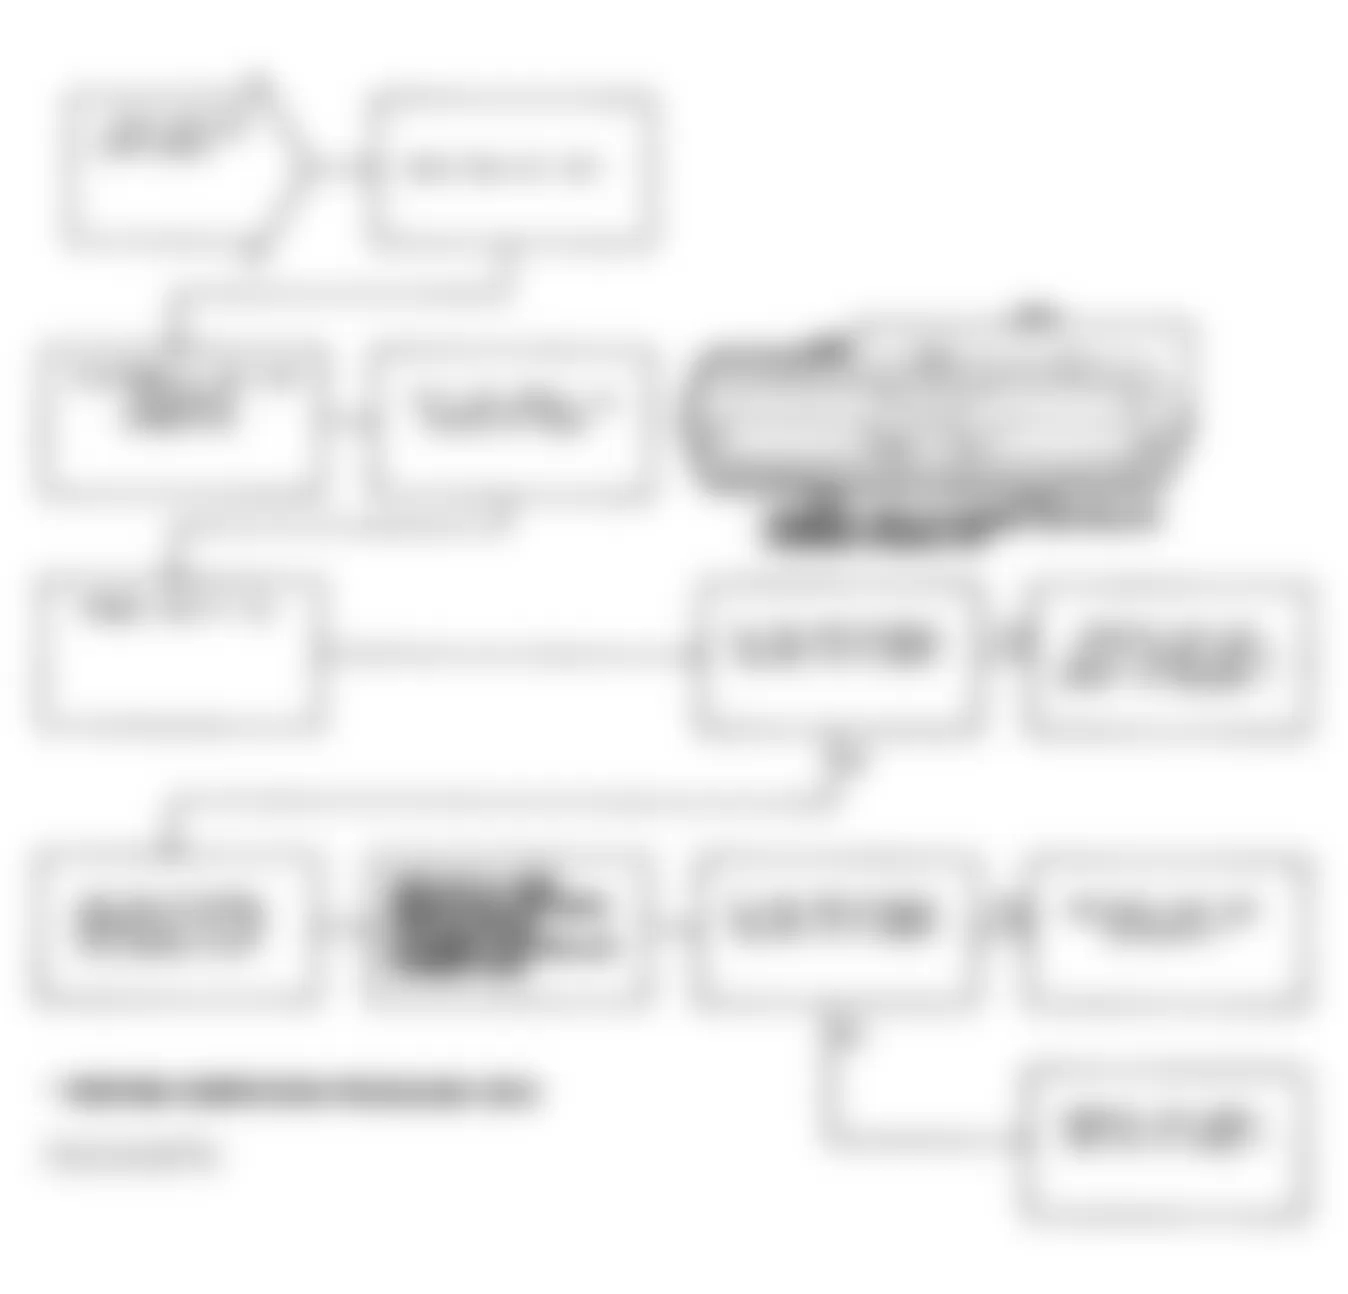 Chrysler New Yorker Salon 1991 - Component Locations -  Test DR-22A Code 32: Flowchart (3 of 3)